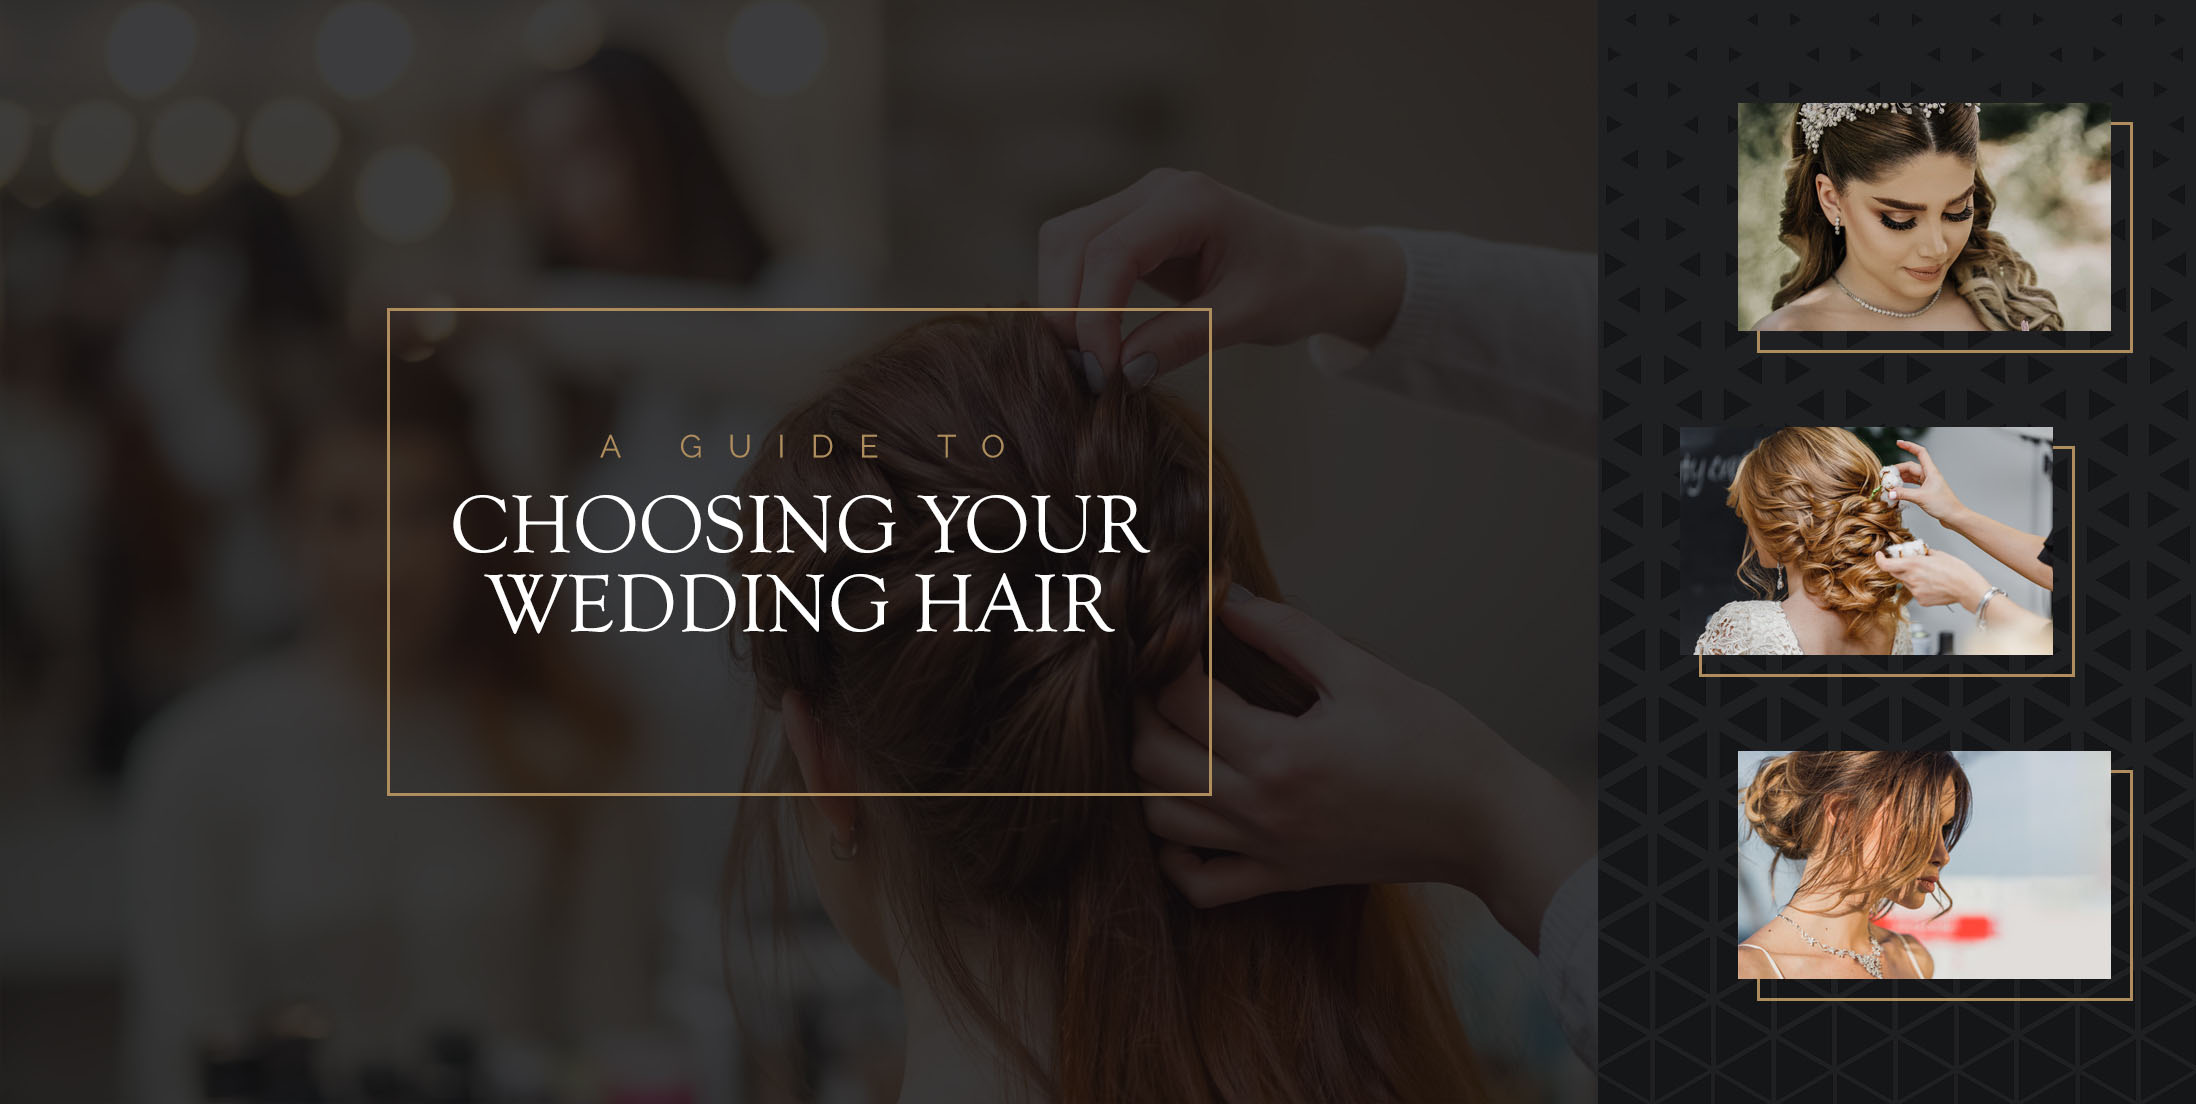 A Guide to Choosing Your Wedding Hair